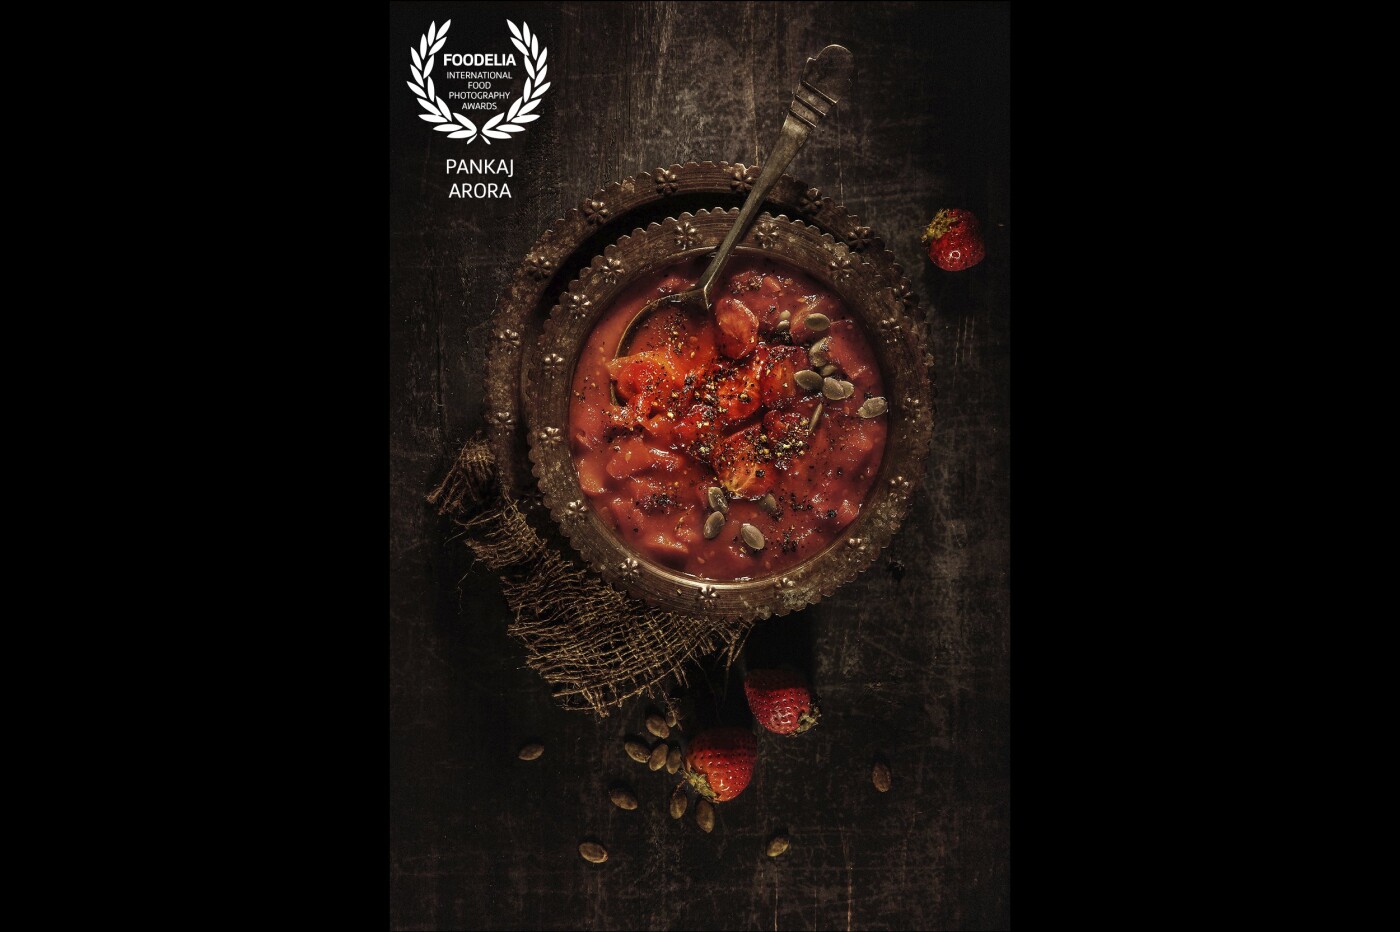 Slowly roasted strawberry and pumpkin cold soup served in a traditional Indian beaten copper serving dish. <br />
Photography style Dark and Moody. <br />
Food Styling by Anjali Ramaswamy